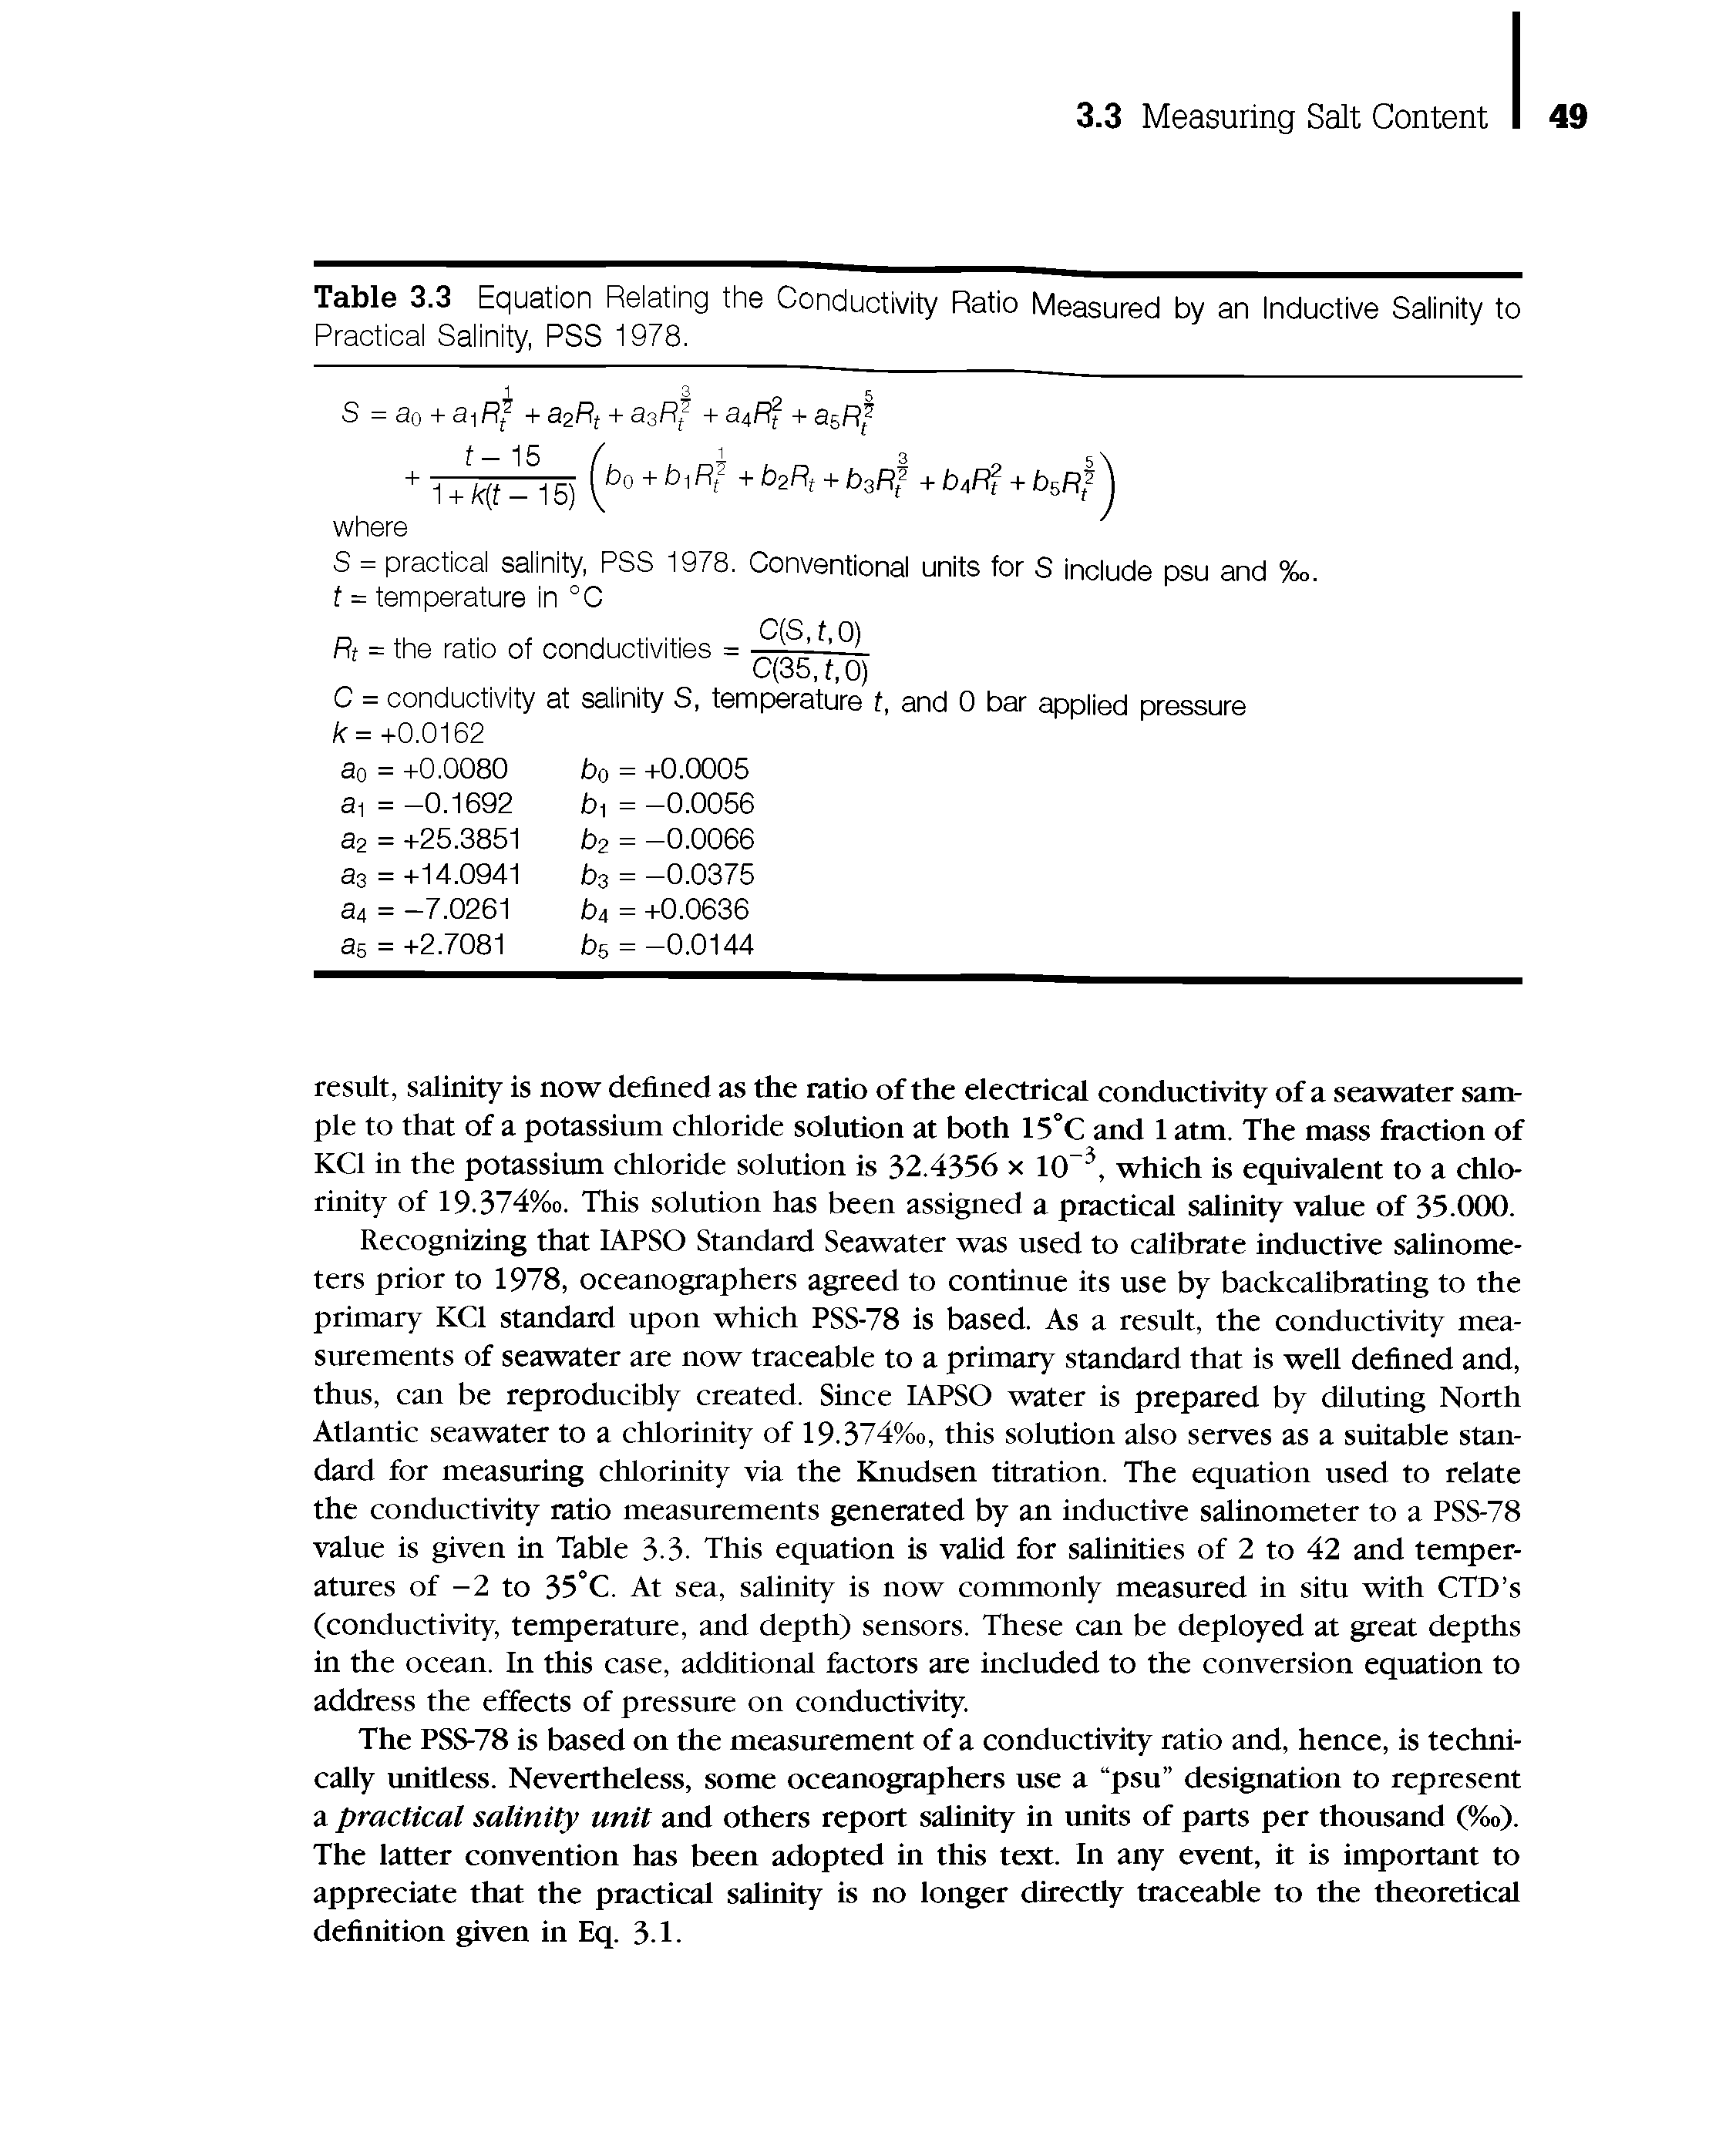 Table 3.3 Equation Relating the Conductivity Ratio Measured by an Inductive Salinity to Practical Salinity, PSS 1978.